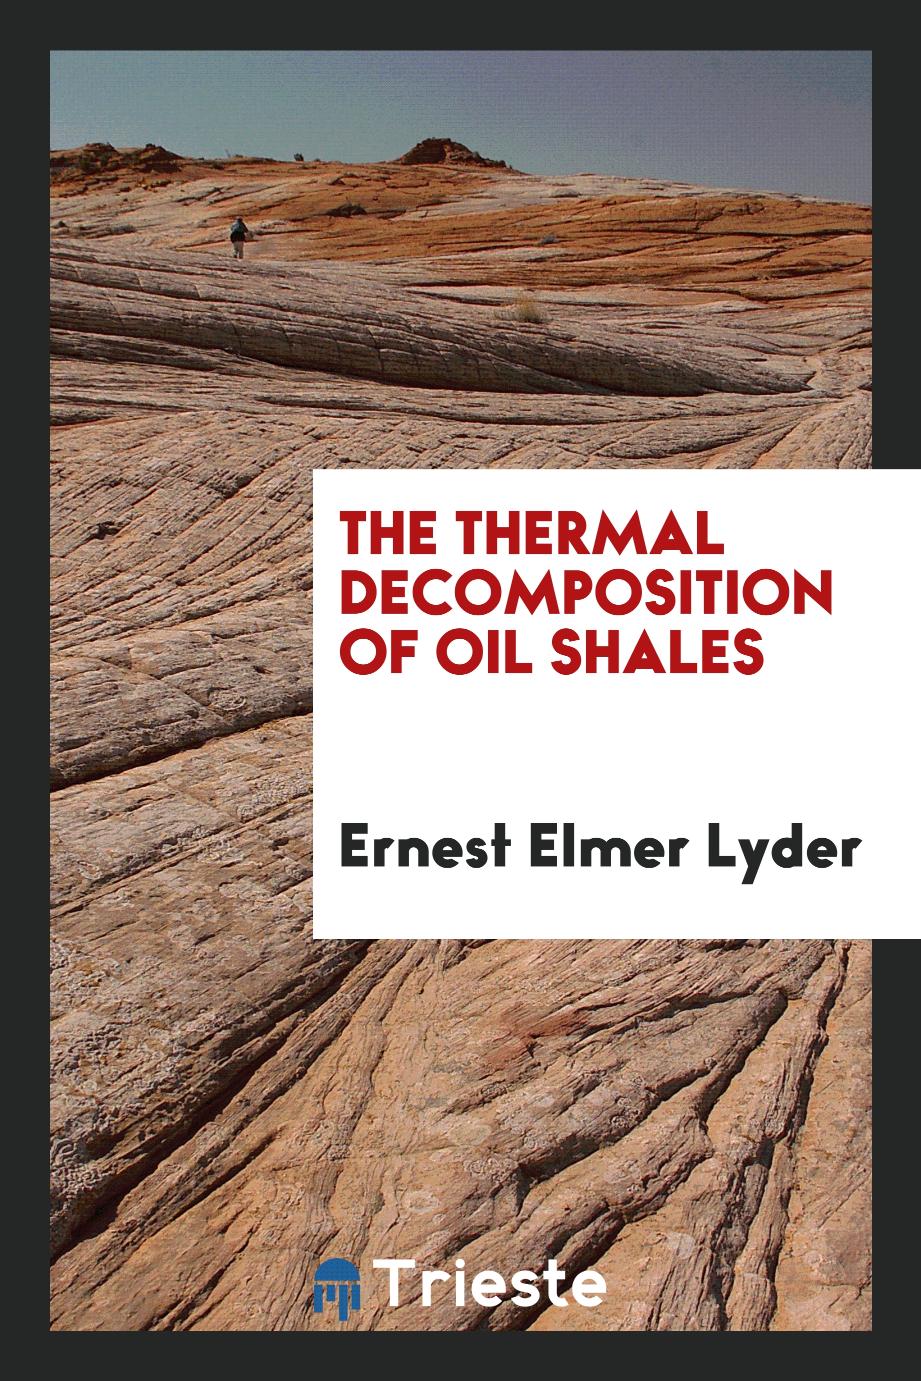 The thermal decomposition of oil shales